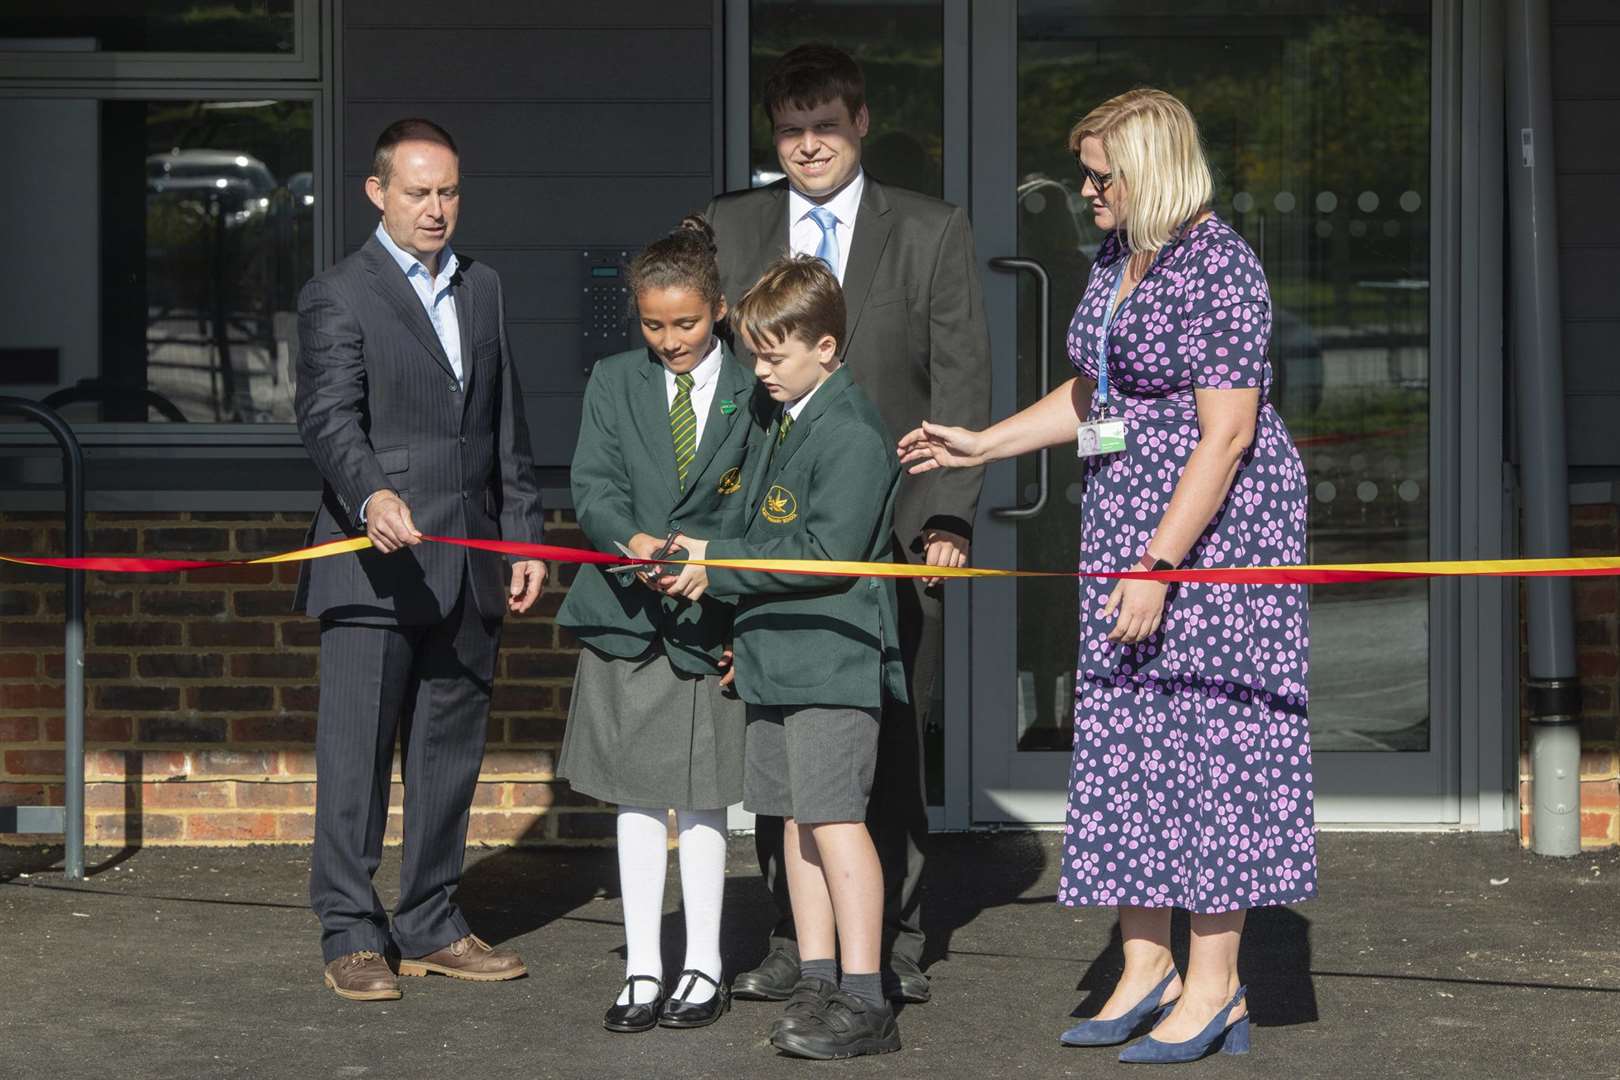 The opening ceremony for the new Platt School: chairman of governors Paul Vallence, Cllr Matt Boughton and Jenna Crittenden, with head girl and boy Annalise Eckersley andJames Benedikz. Picture: Scott Wishart